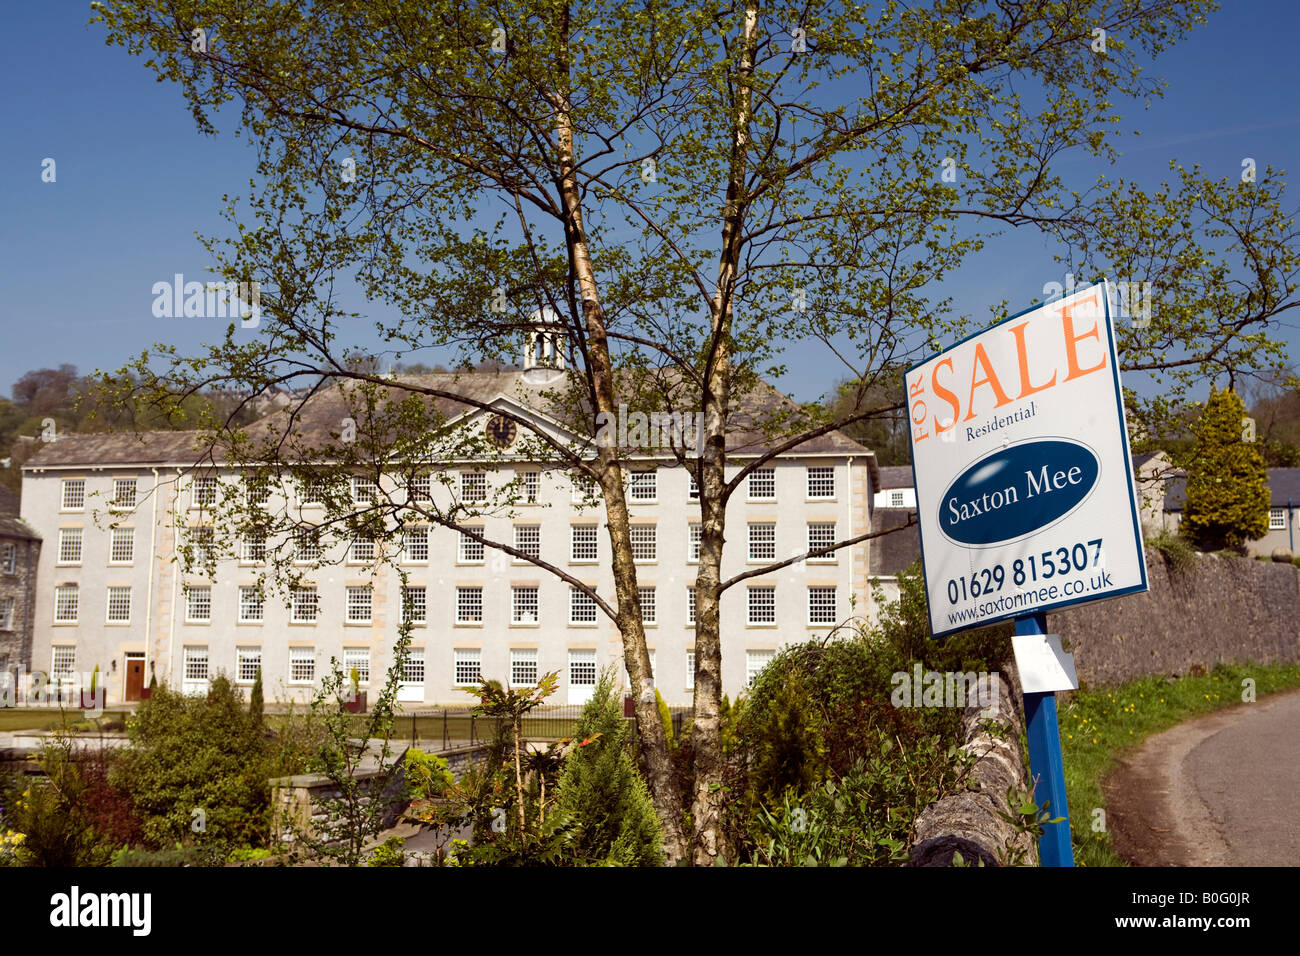 UK Derbyshire Monsal Dale Richard Arkwrights Cressbrook Mill converted to residential apartments for sale board Stock Photo